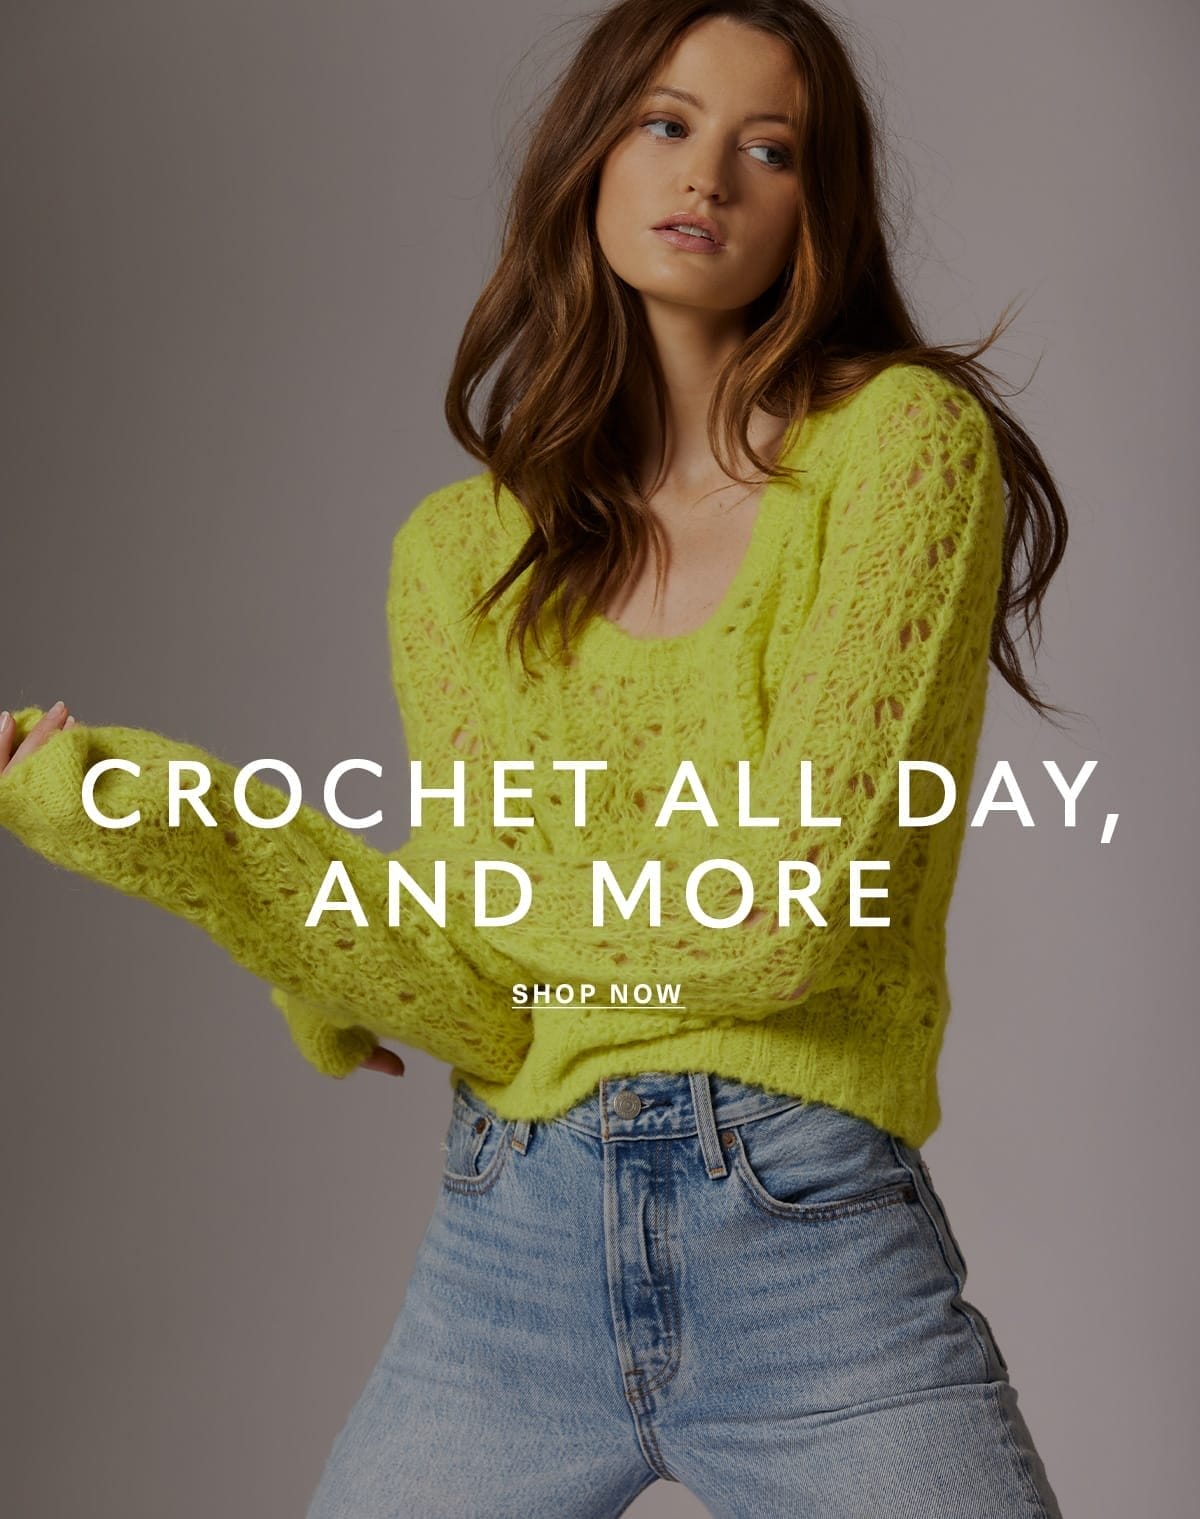 CROCHET ALL DAY, AND MORE SHOP NOW